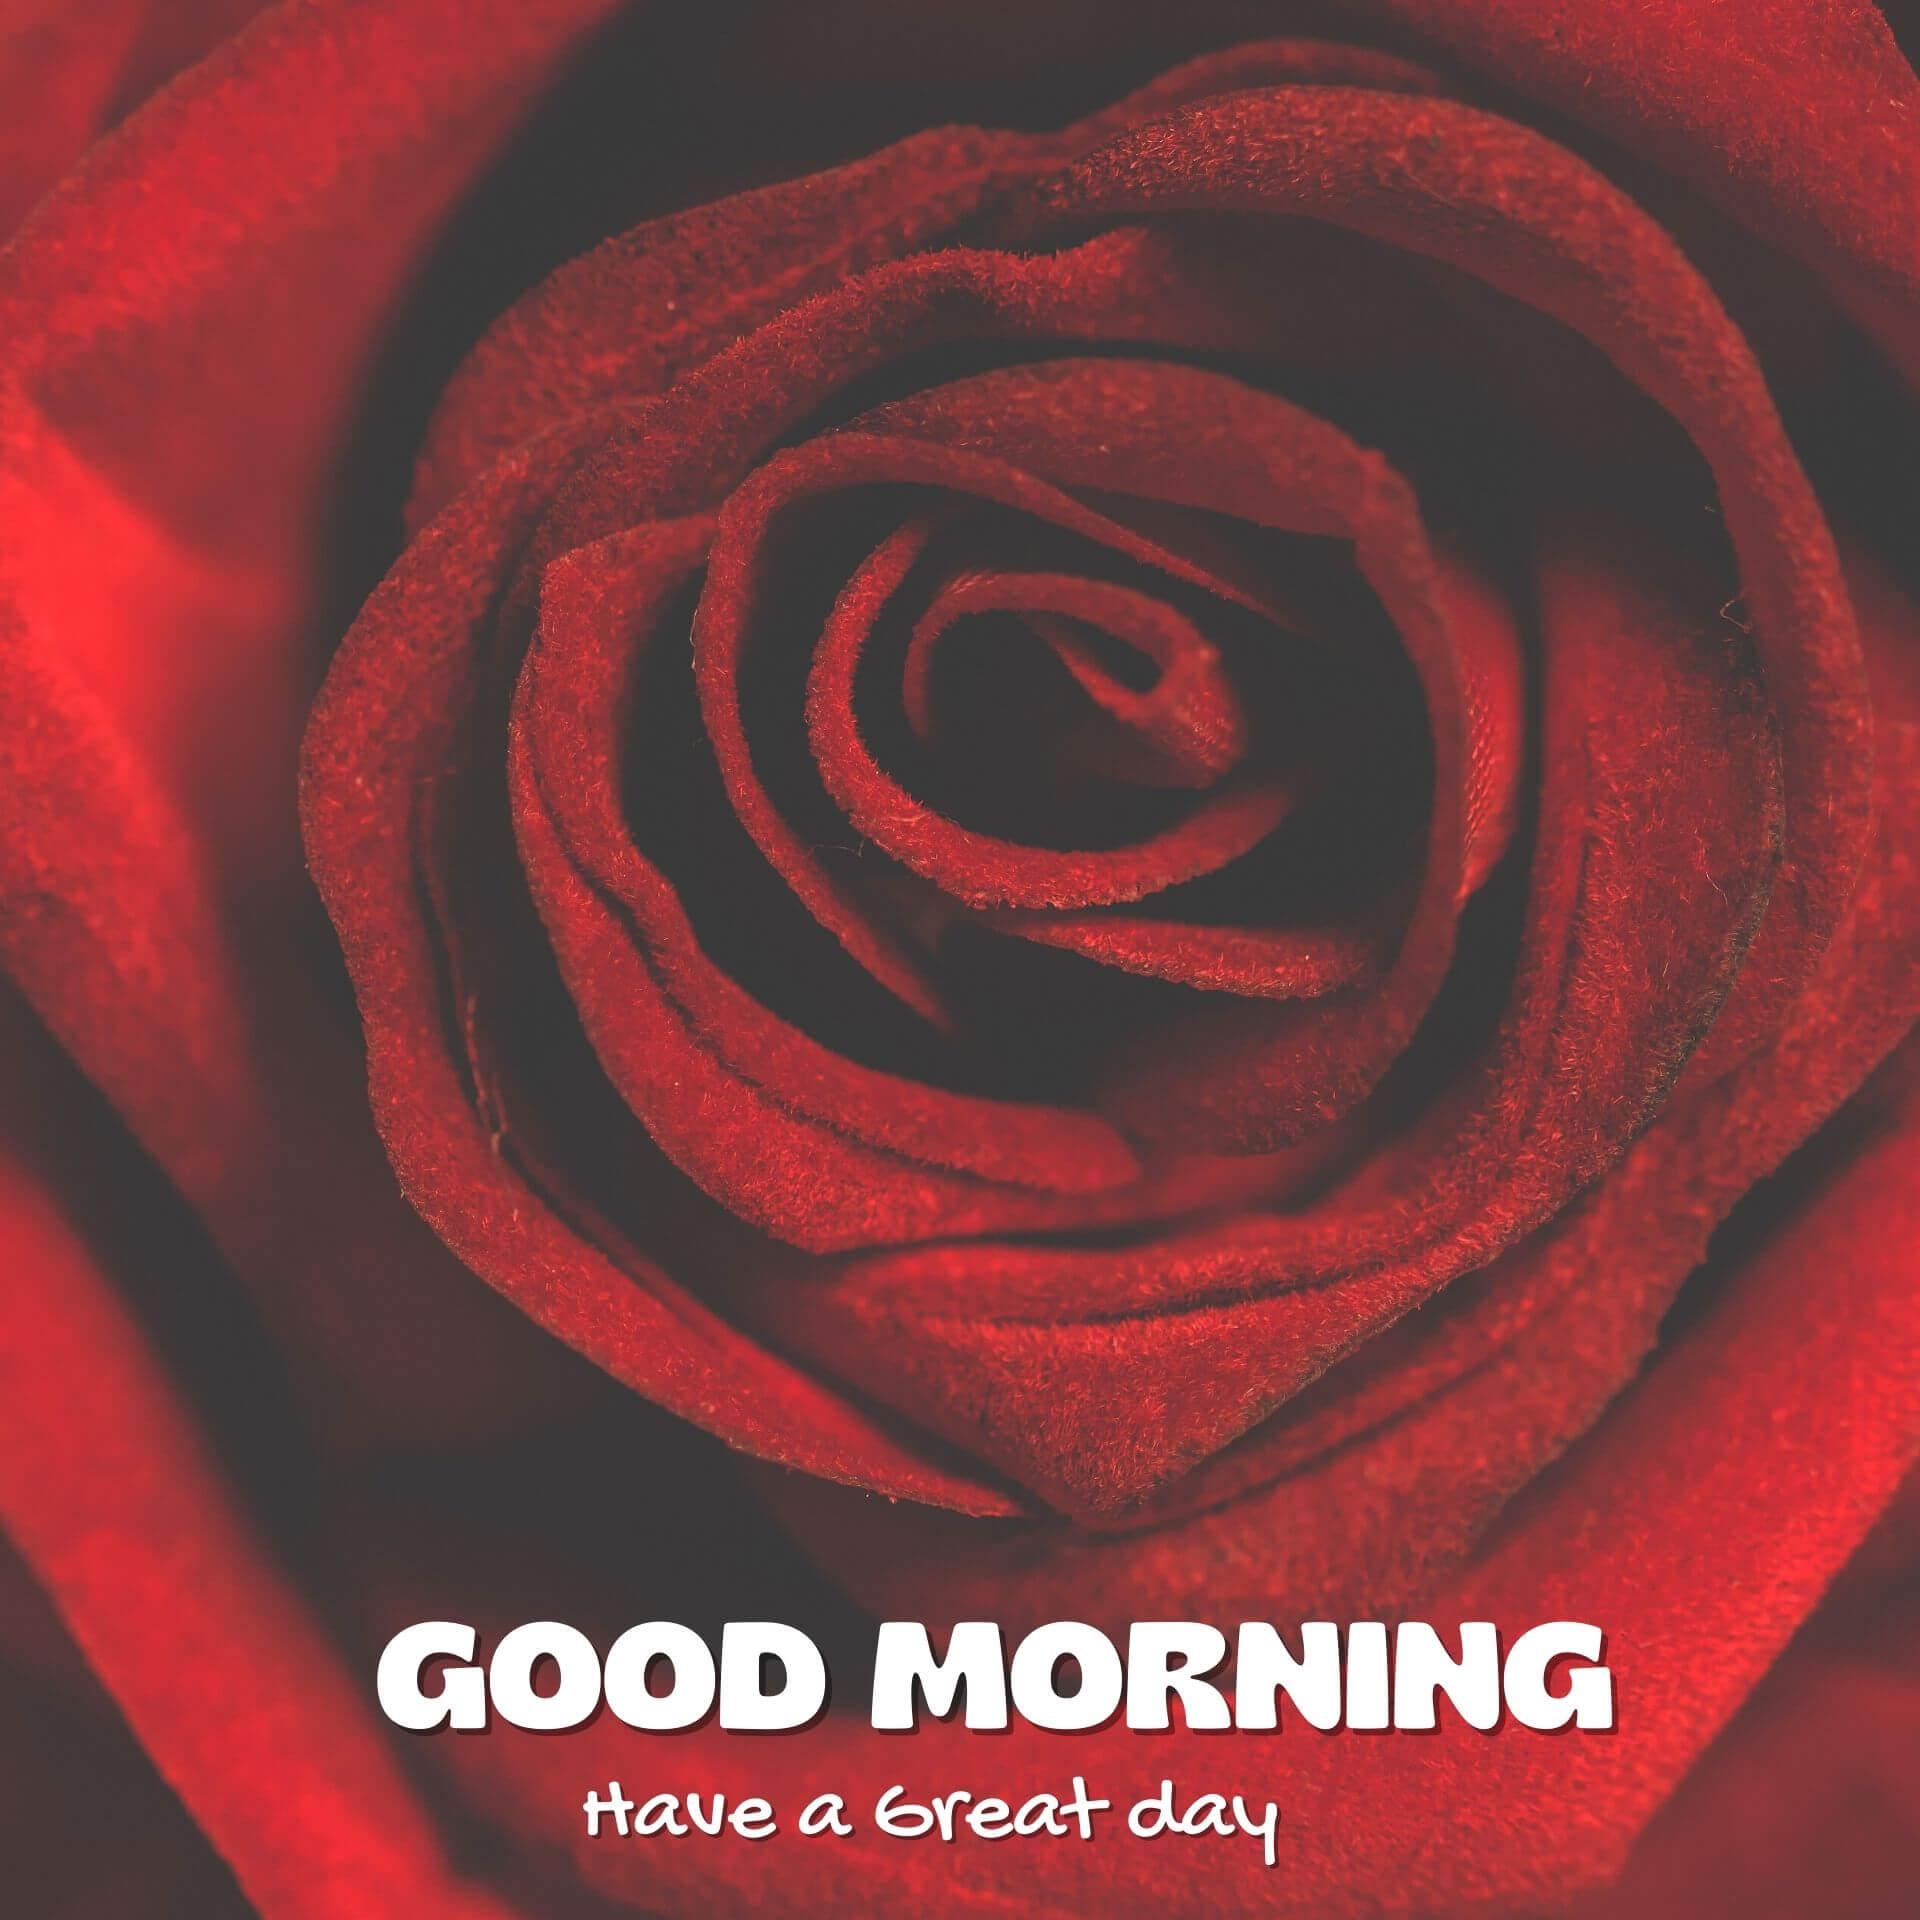 Good morning have a nice day Wallpaper Pics With Rose